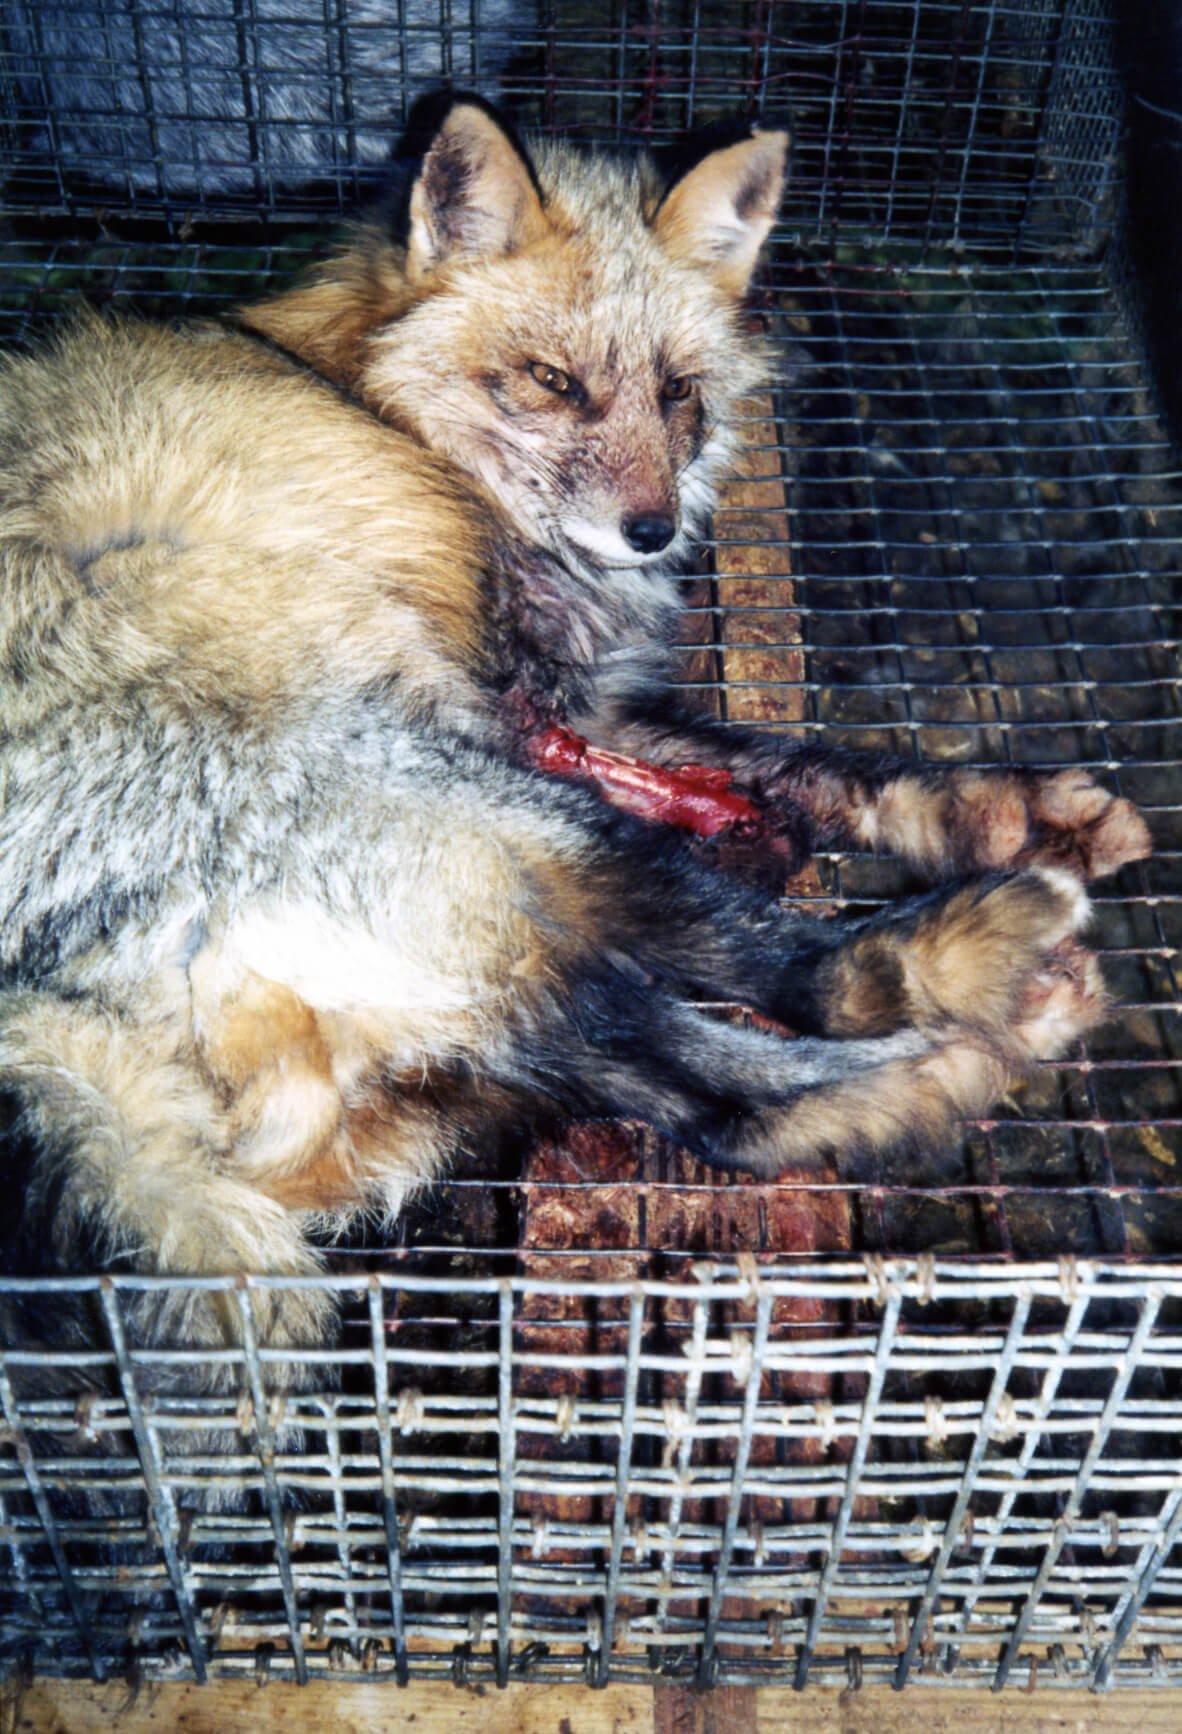 Animals Used for Fur